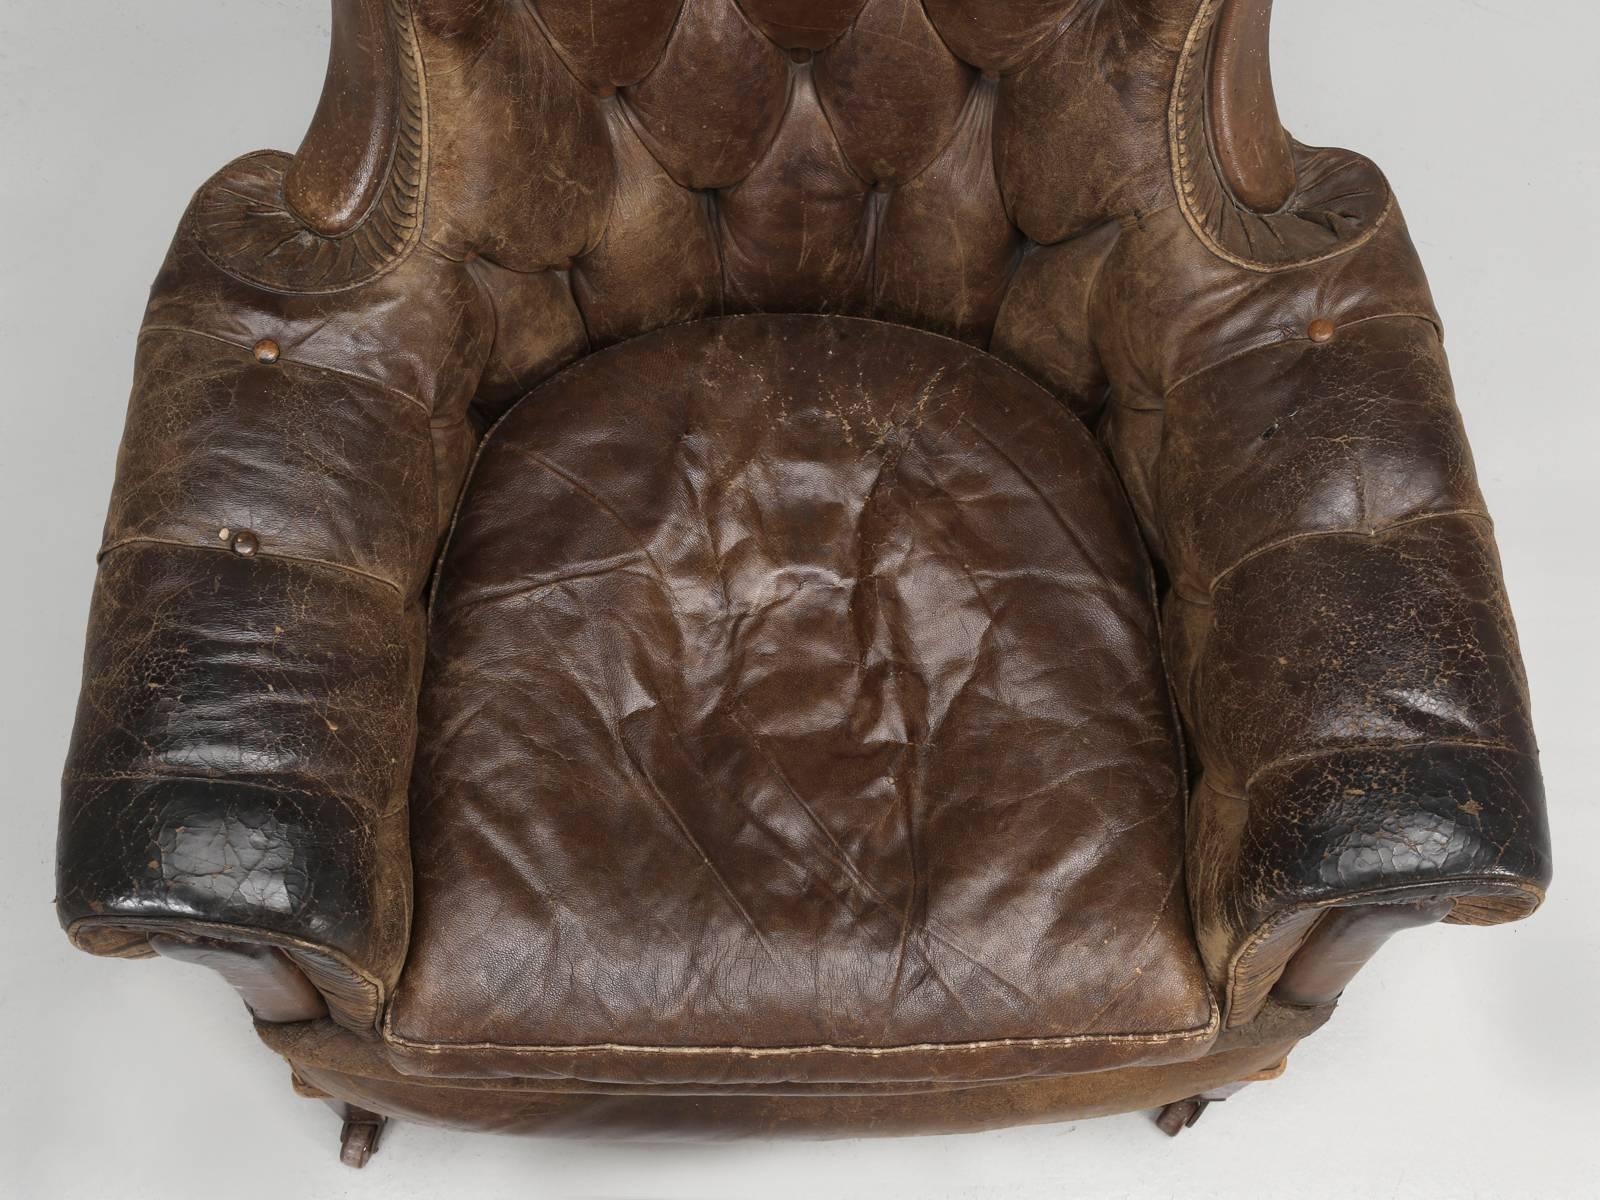 Country Antique French Leather Chair, circa 1800s